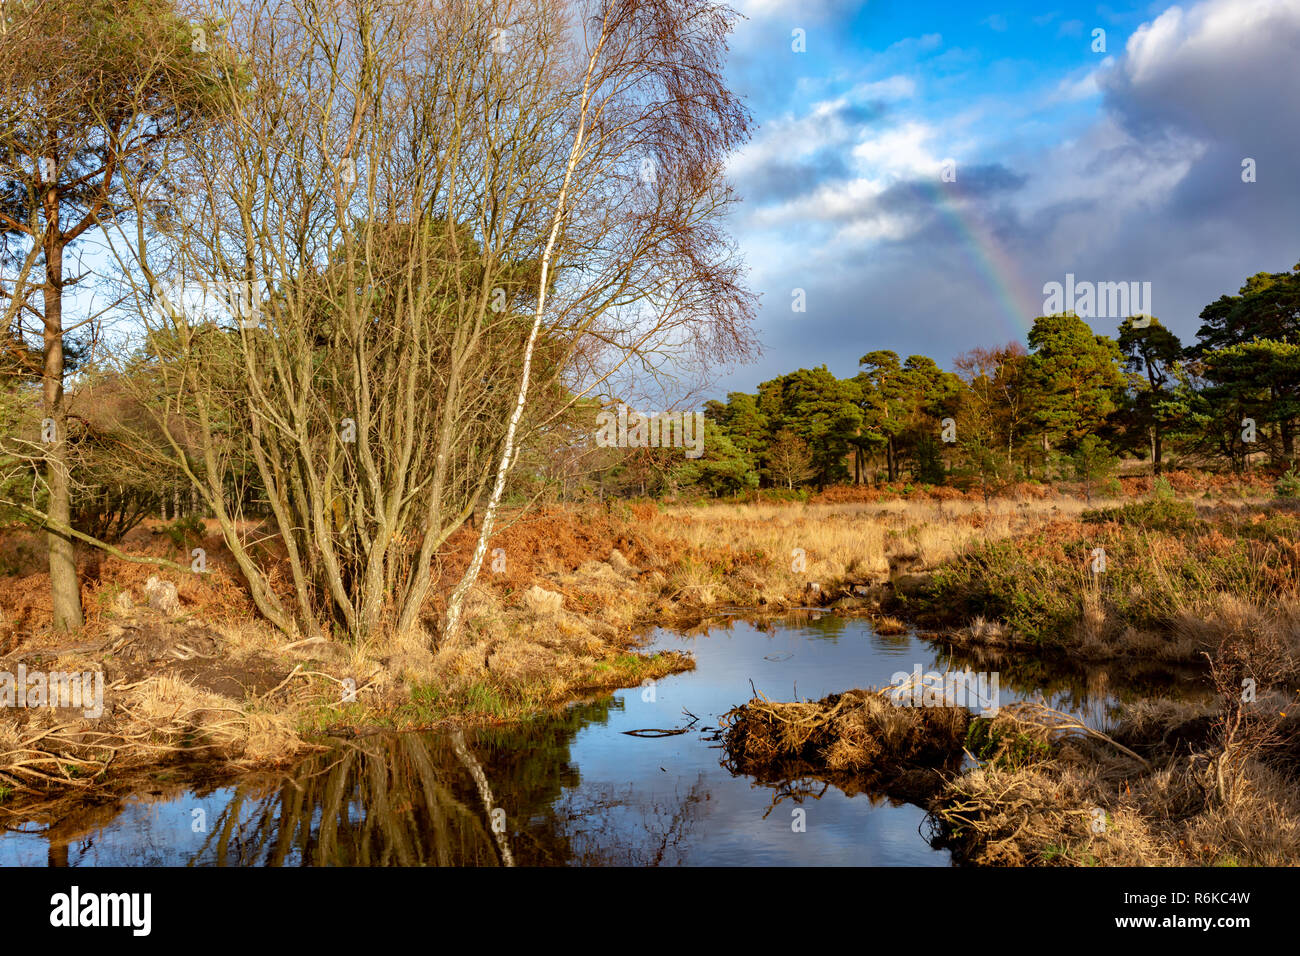 Vibrant landscape photograph taken on Canford heath nature reserve with sunlit foreground and cloudy background with rainbow. Stock Photo